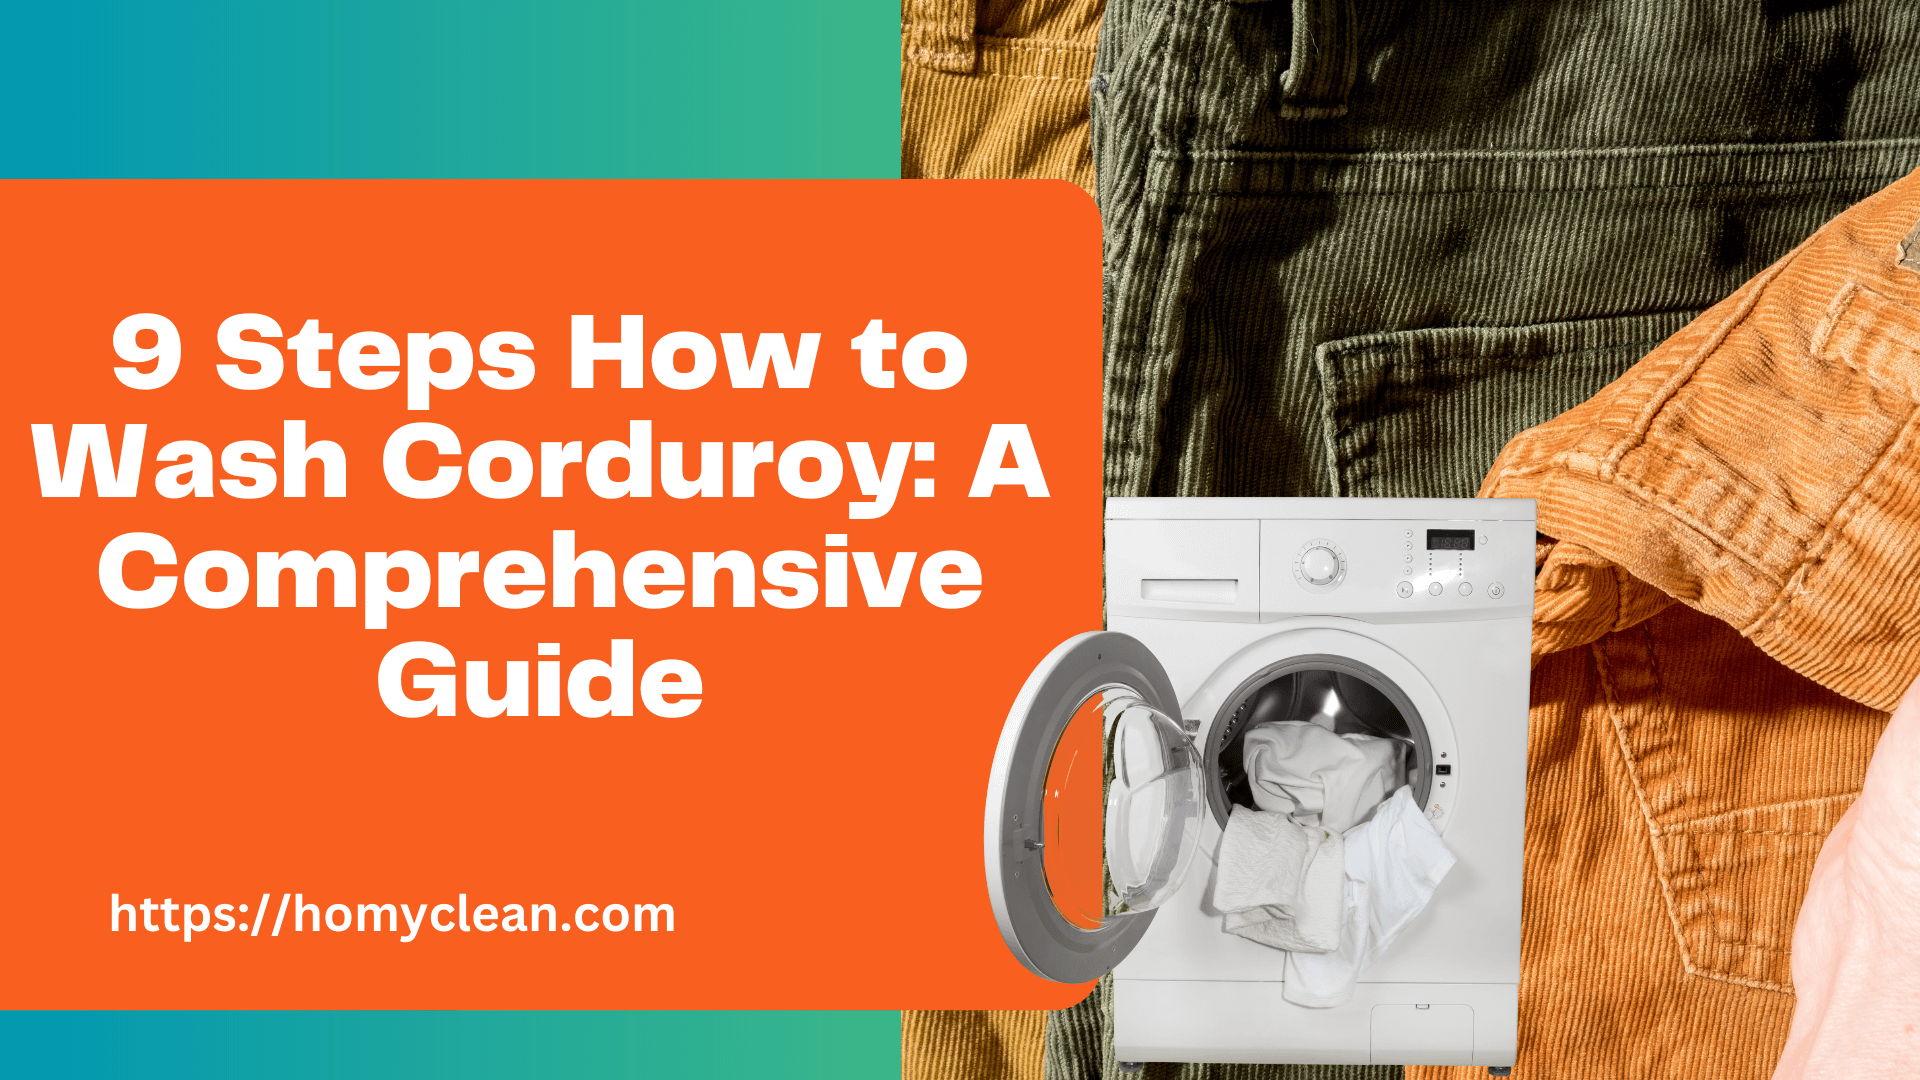 9 Steps How to Wash Corduroy: A Comprehensive Guide